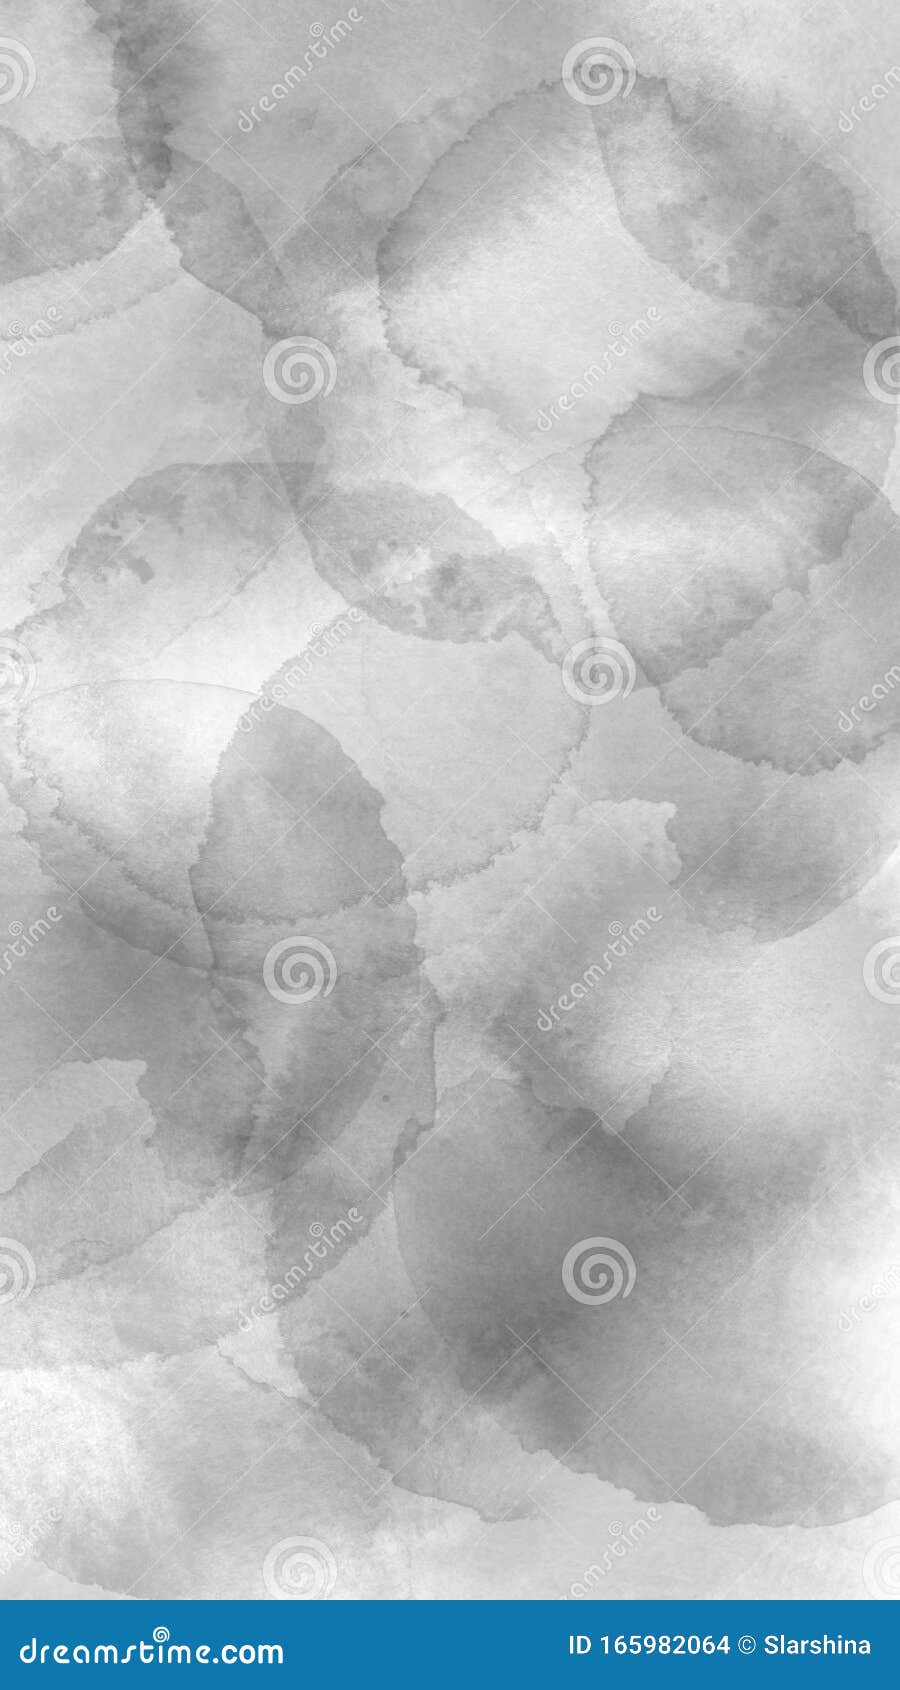 Abstract Watercolor Grey Spots. Decorative Background for Stories, Fabric,  Banners, Cards and Invitations. Size 9:16. Stock Photo - Image of light,  paint: 165982064